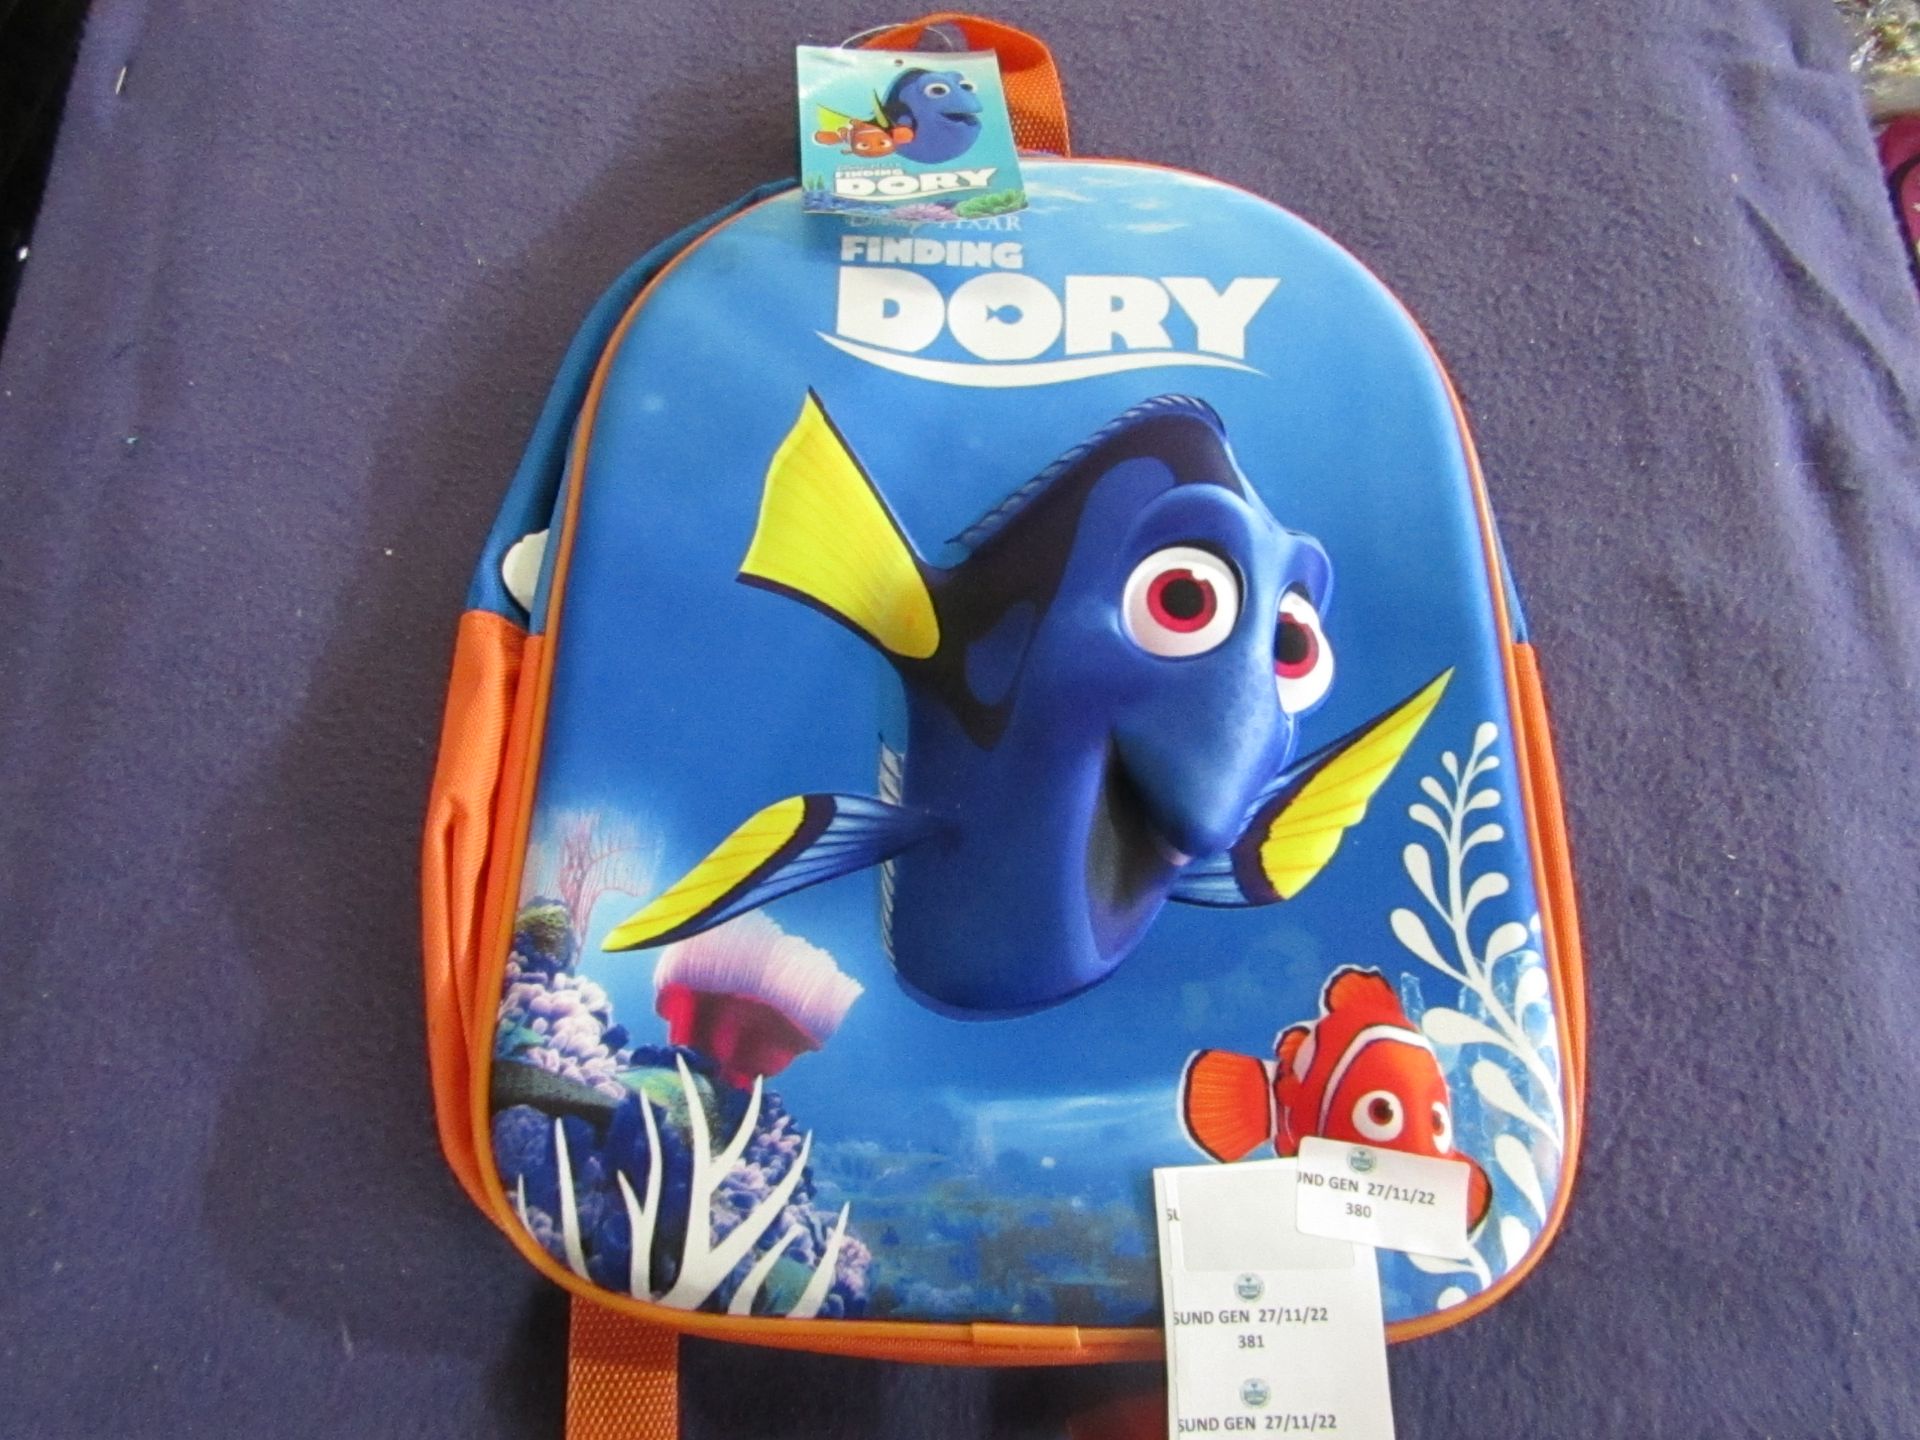 Finding Dory - 3D Backpack - Unused, No Packaging.